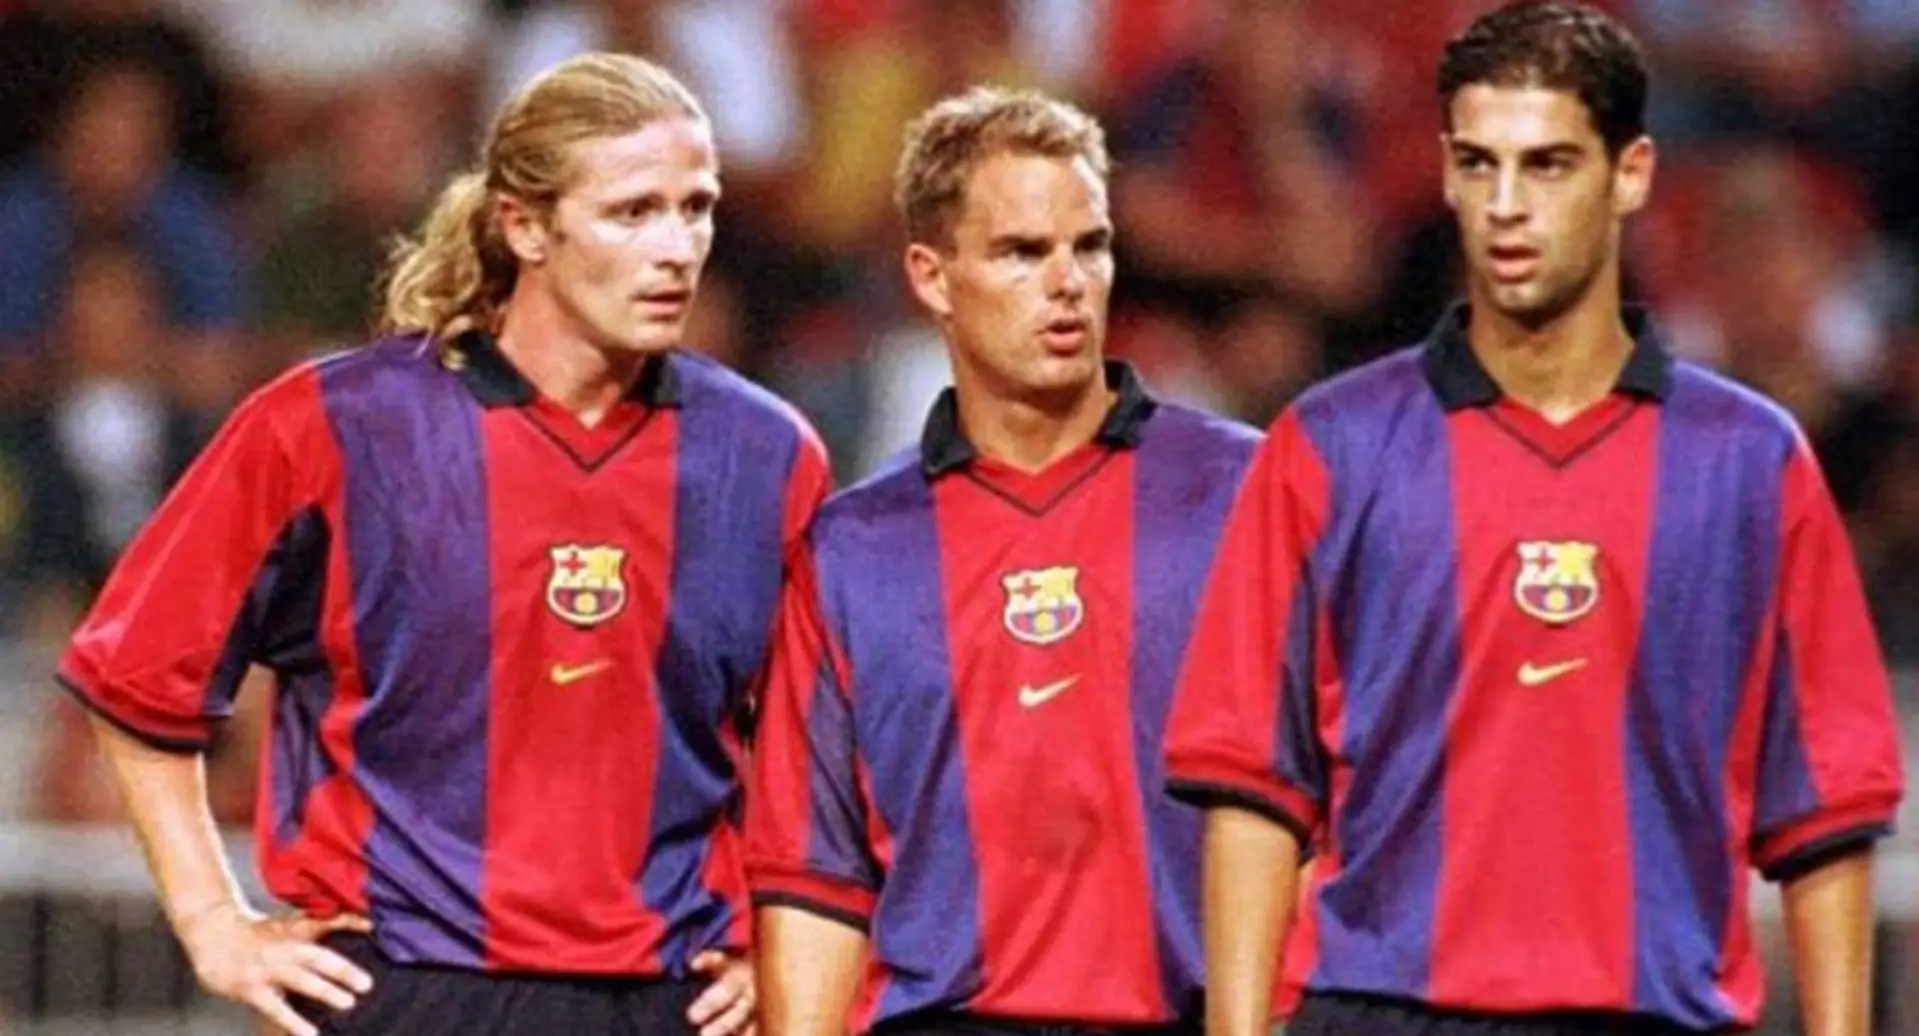 'It's like playing for a country': Emmanuel Petit on why playing for Barca is different from other clubs